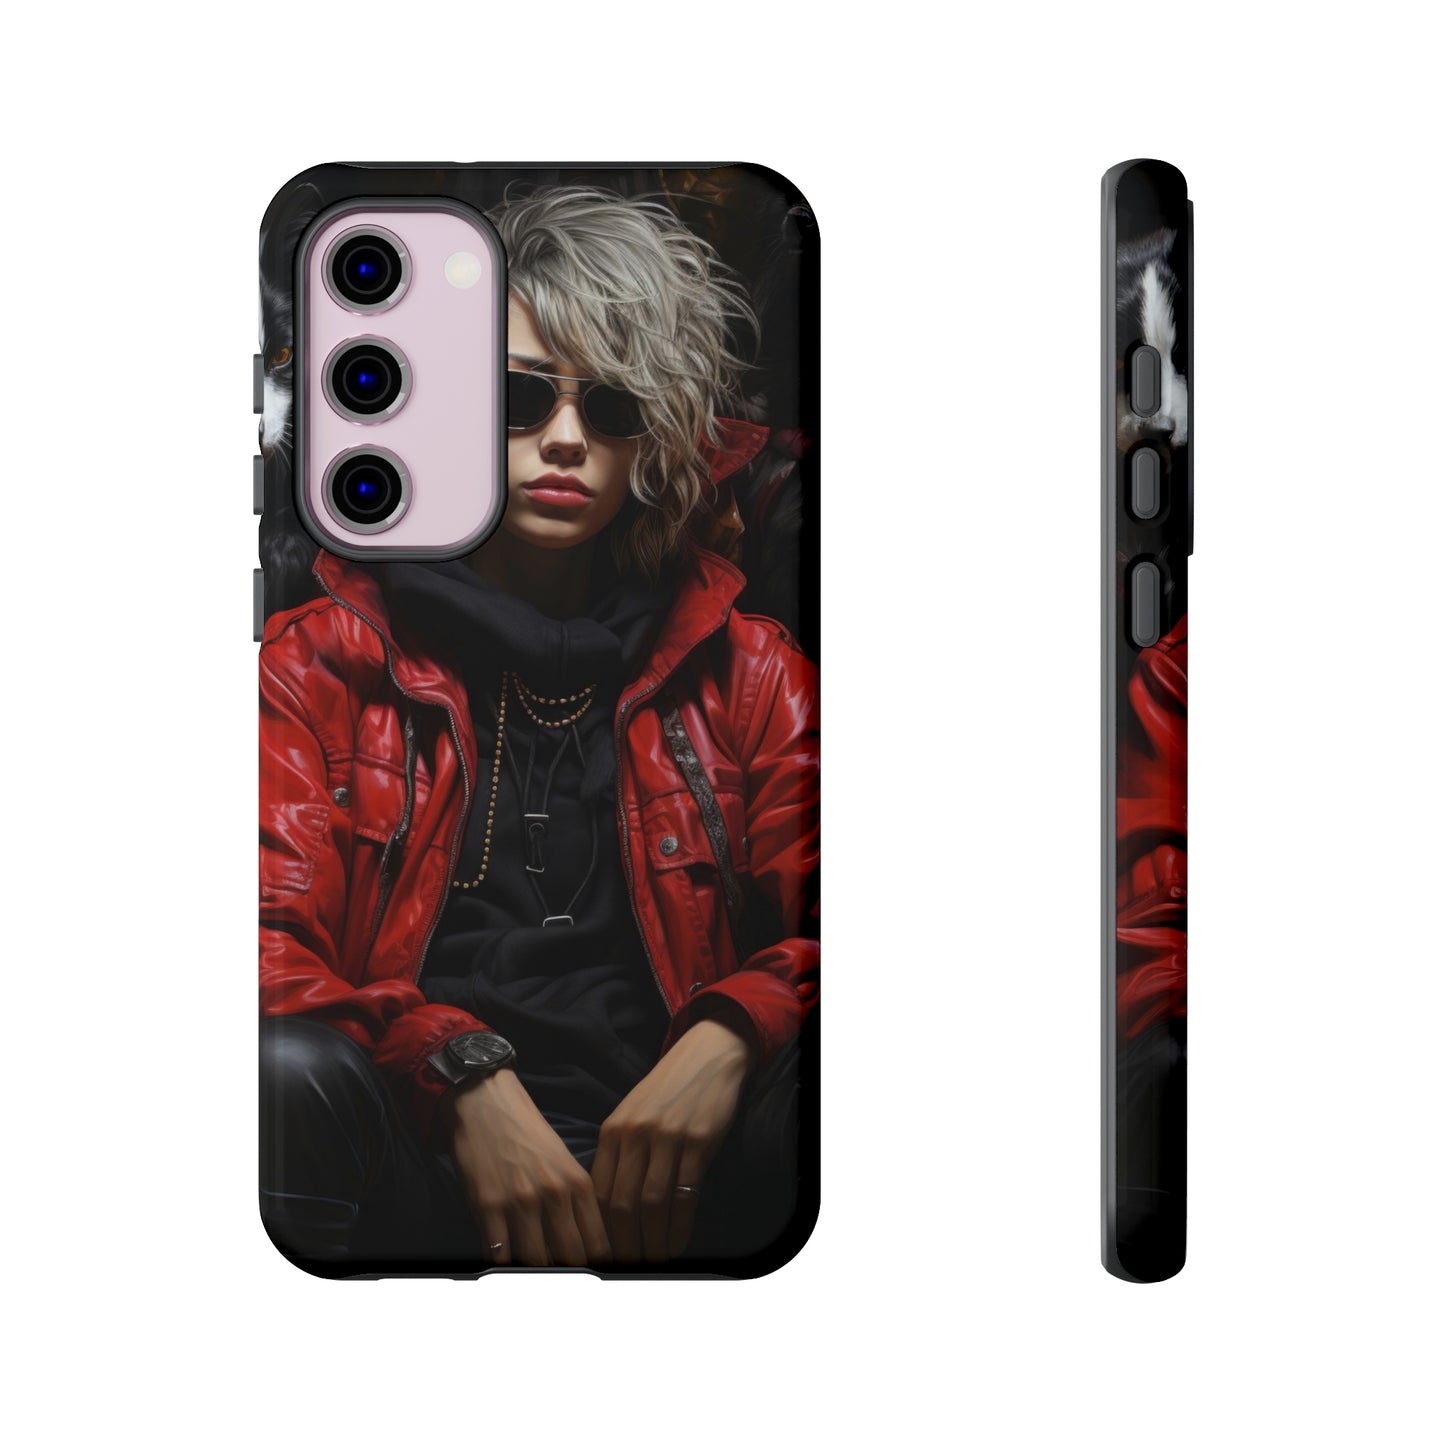 Red Rebel Realm: Woman in Leather Jacket with Fantasy Dogs Phone Case for iPhone, Samsung, Pixel